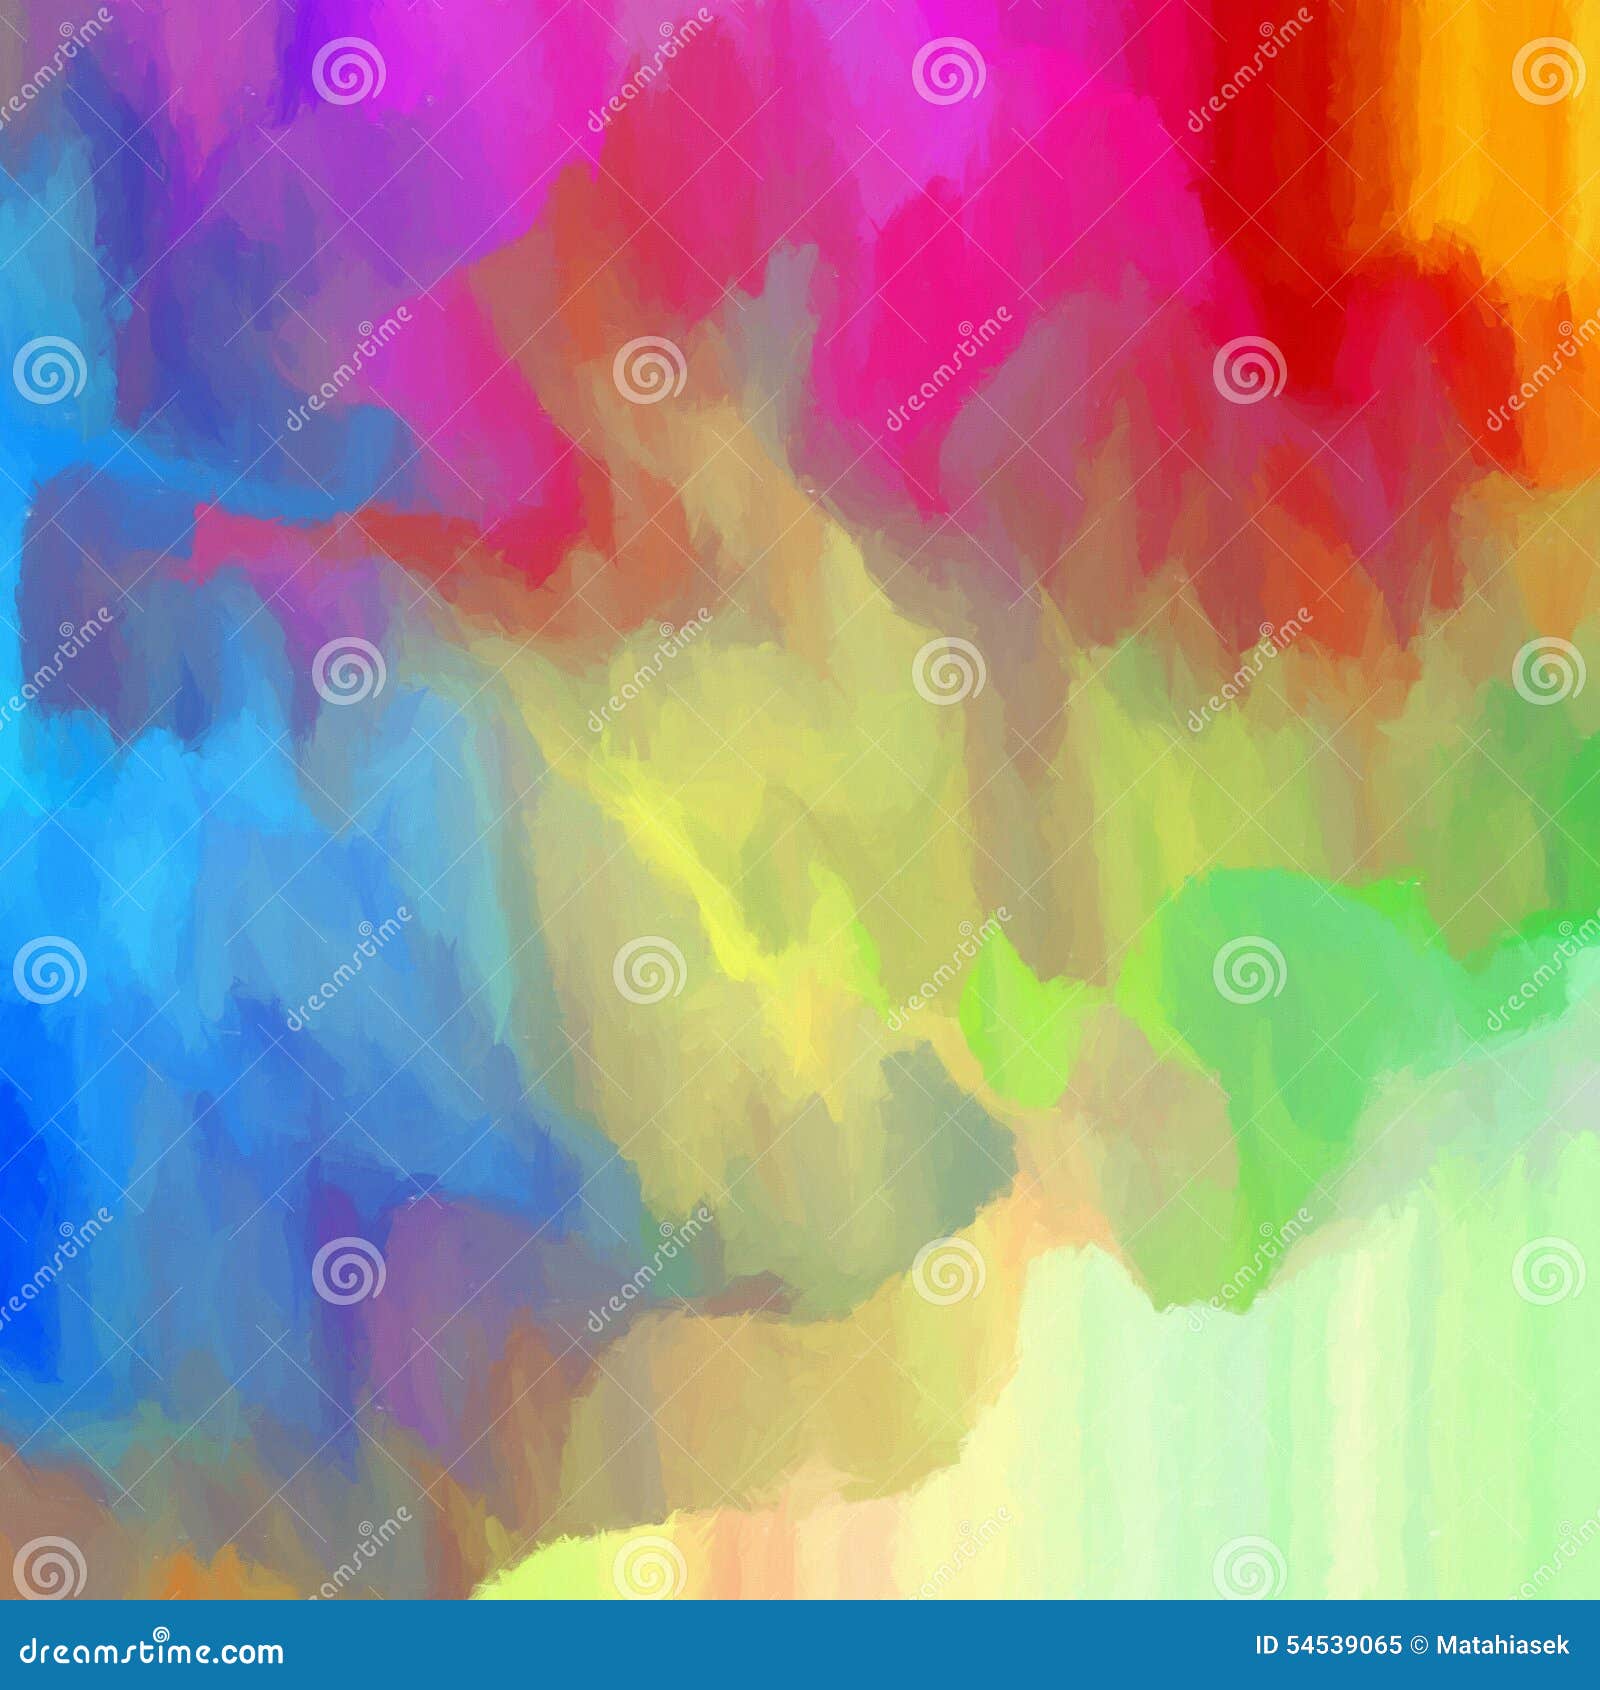 Abstract Colorful Background - Digital Painting Stock Illustration -  Illustration of design, patch: 54539065